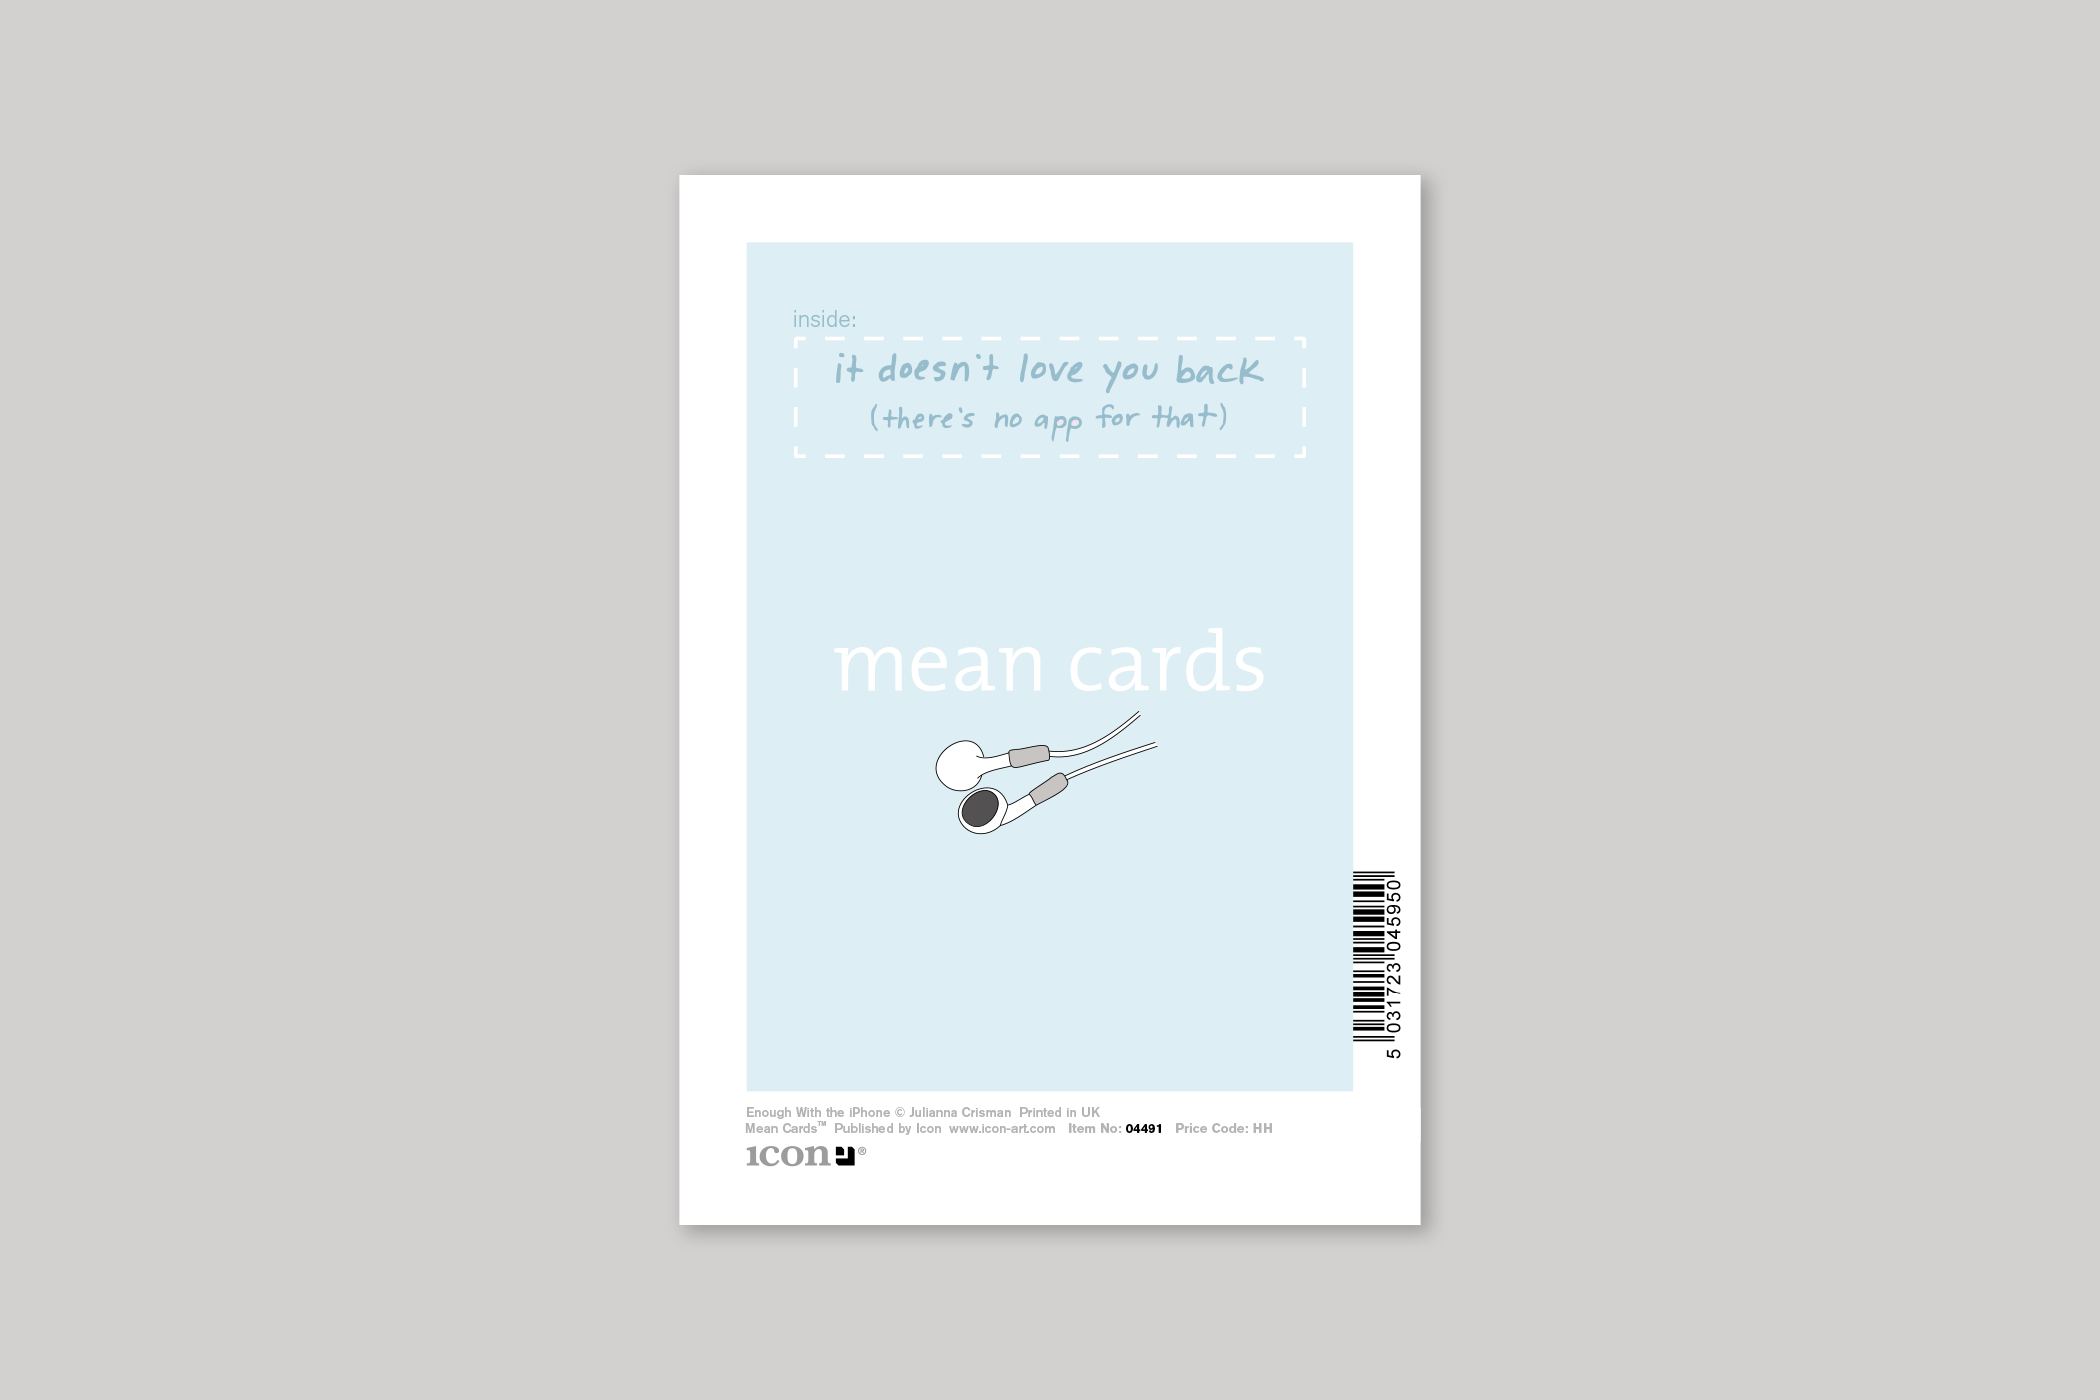 Enough With the iPhone humorous illustration from Mean Cards range of greeting cards by Icon, with envelope.